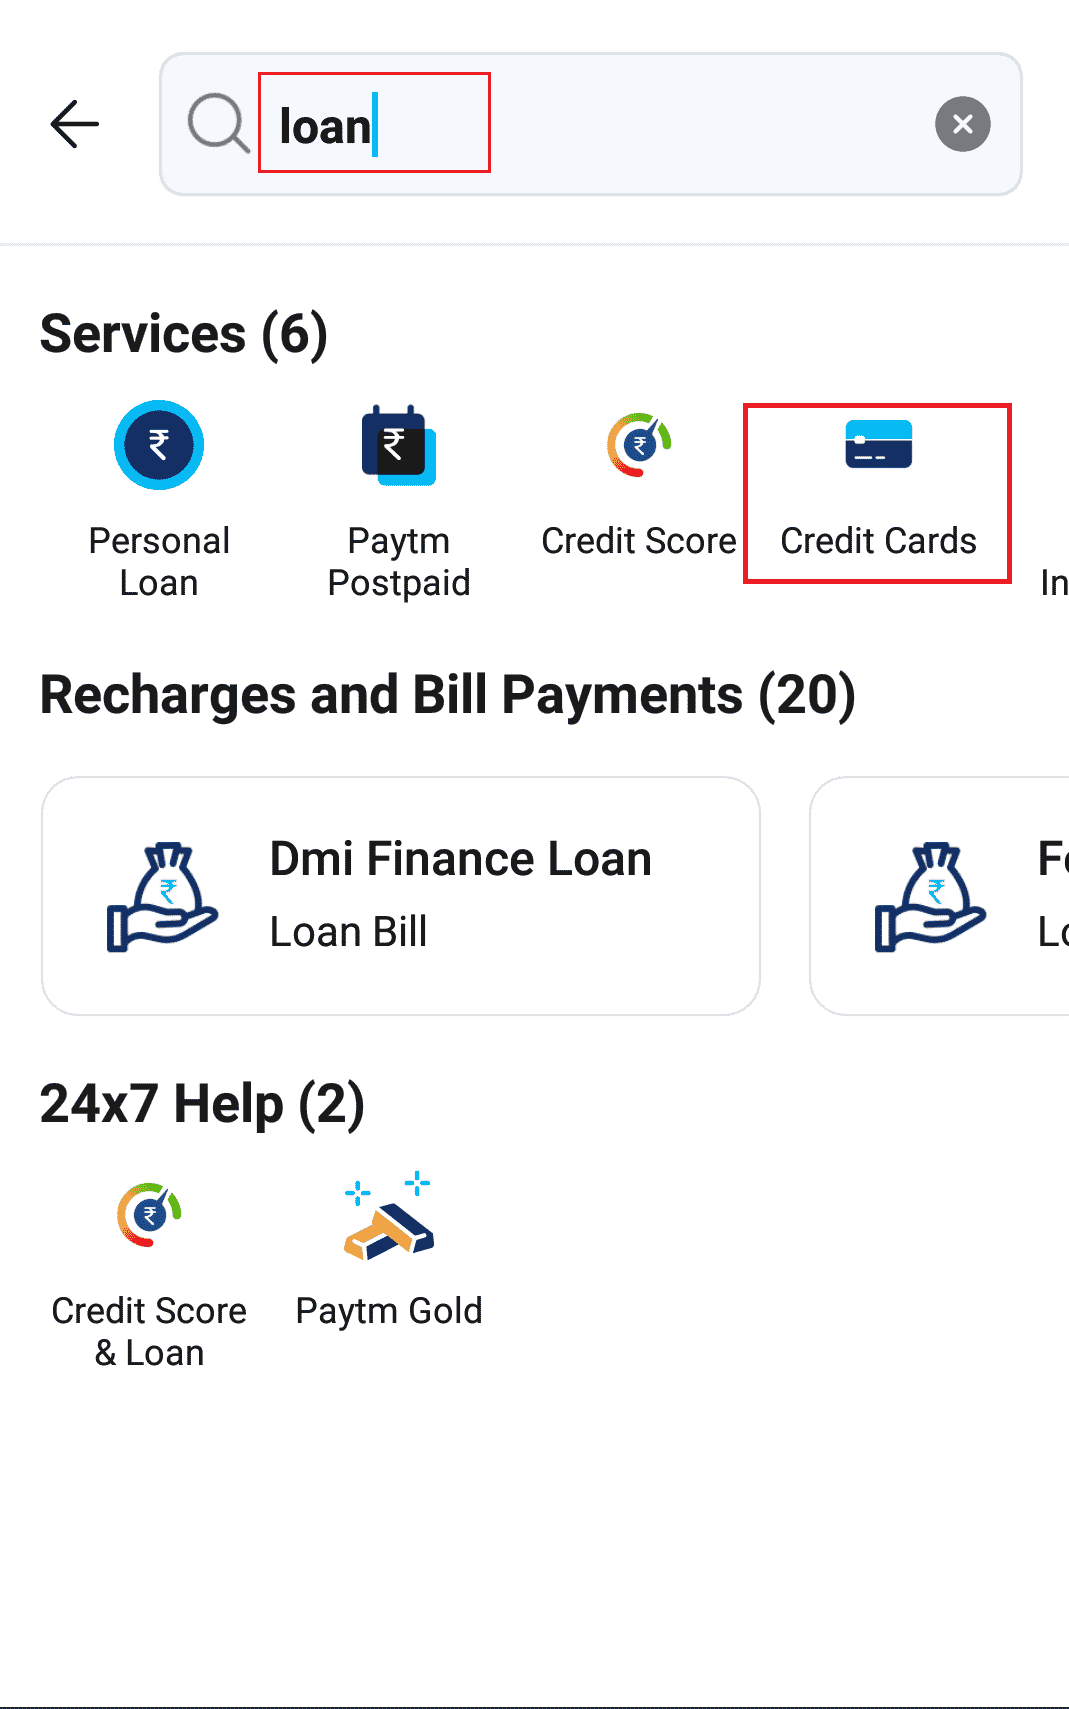 Paytm search loan in search bar choose Credit Cards